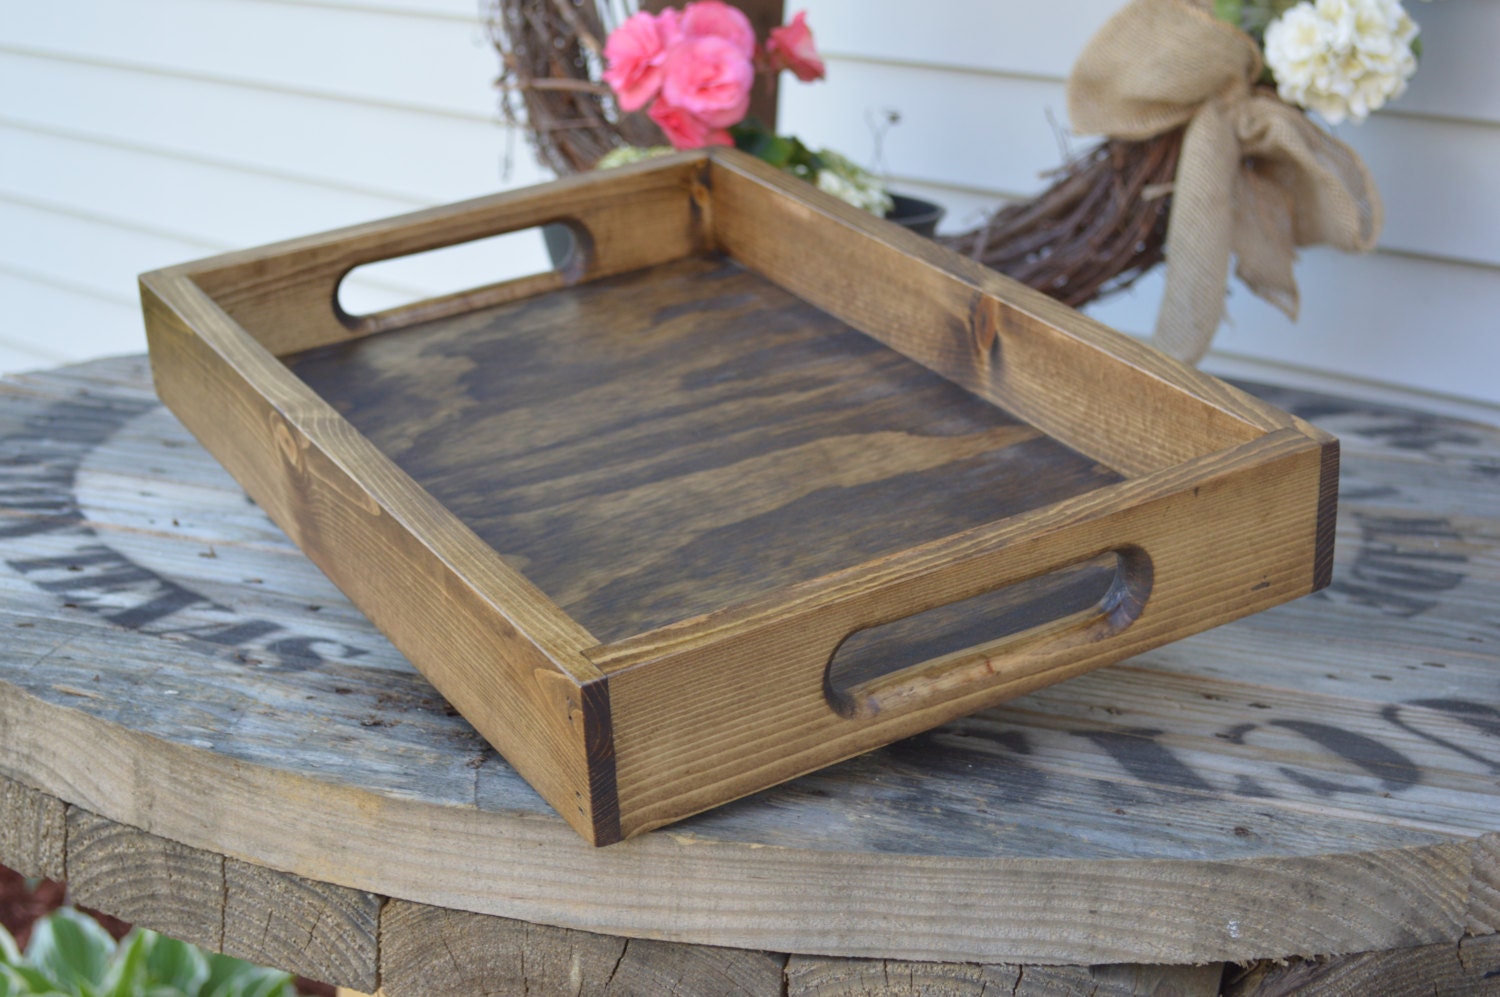 Wooden Tray Rustic Wooden Tray Wooden Ottoman Tray Ottoman